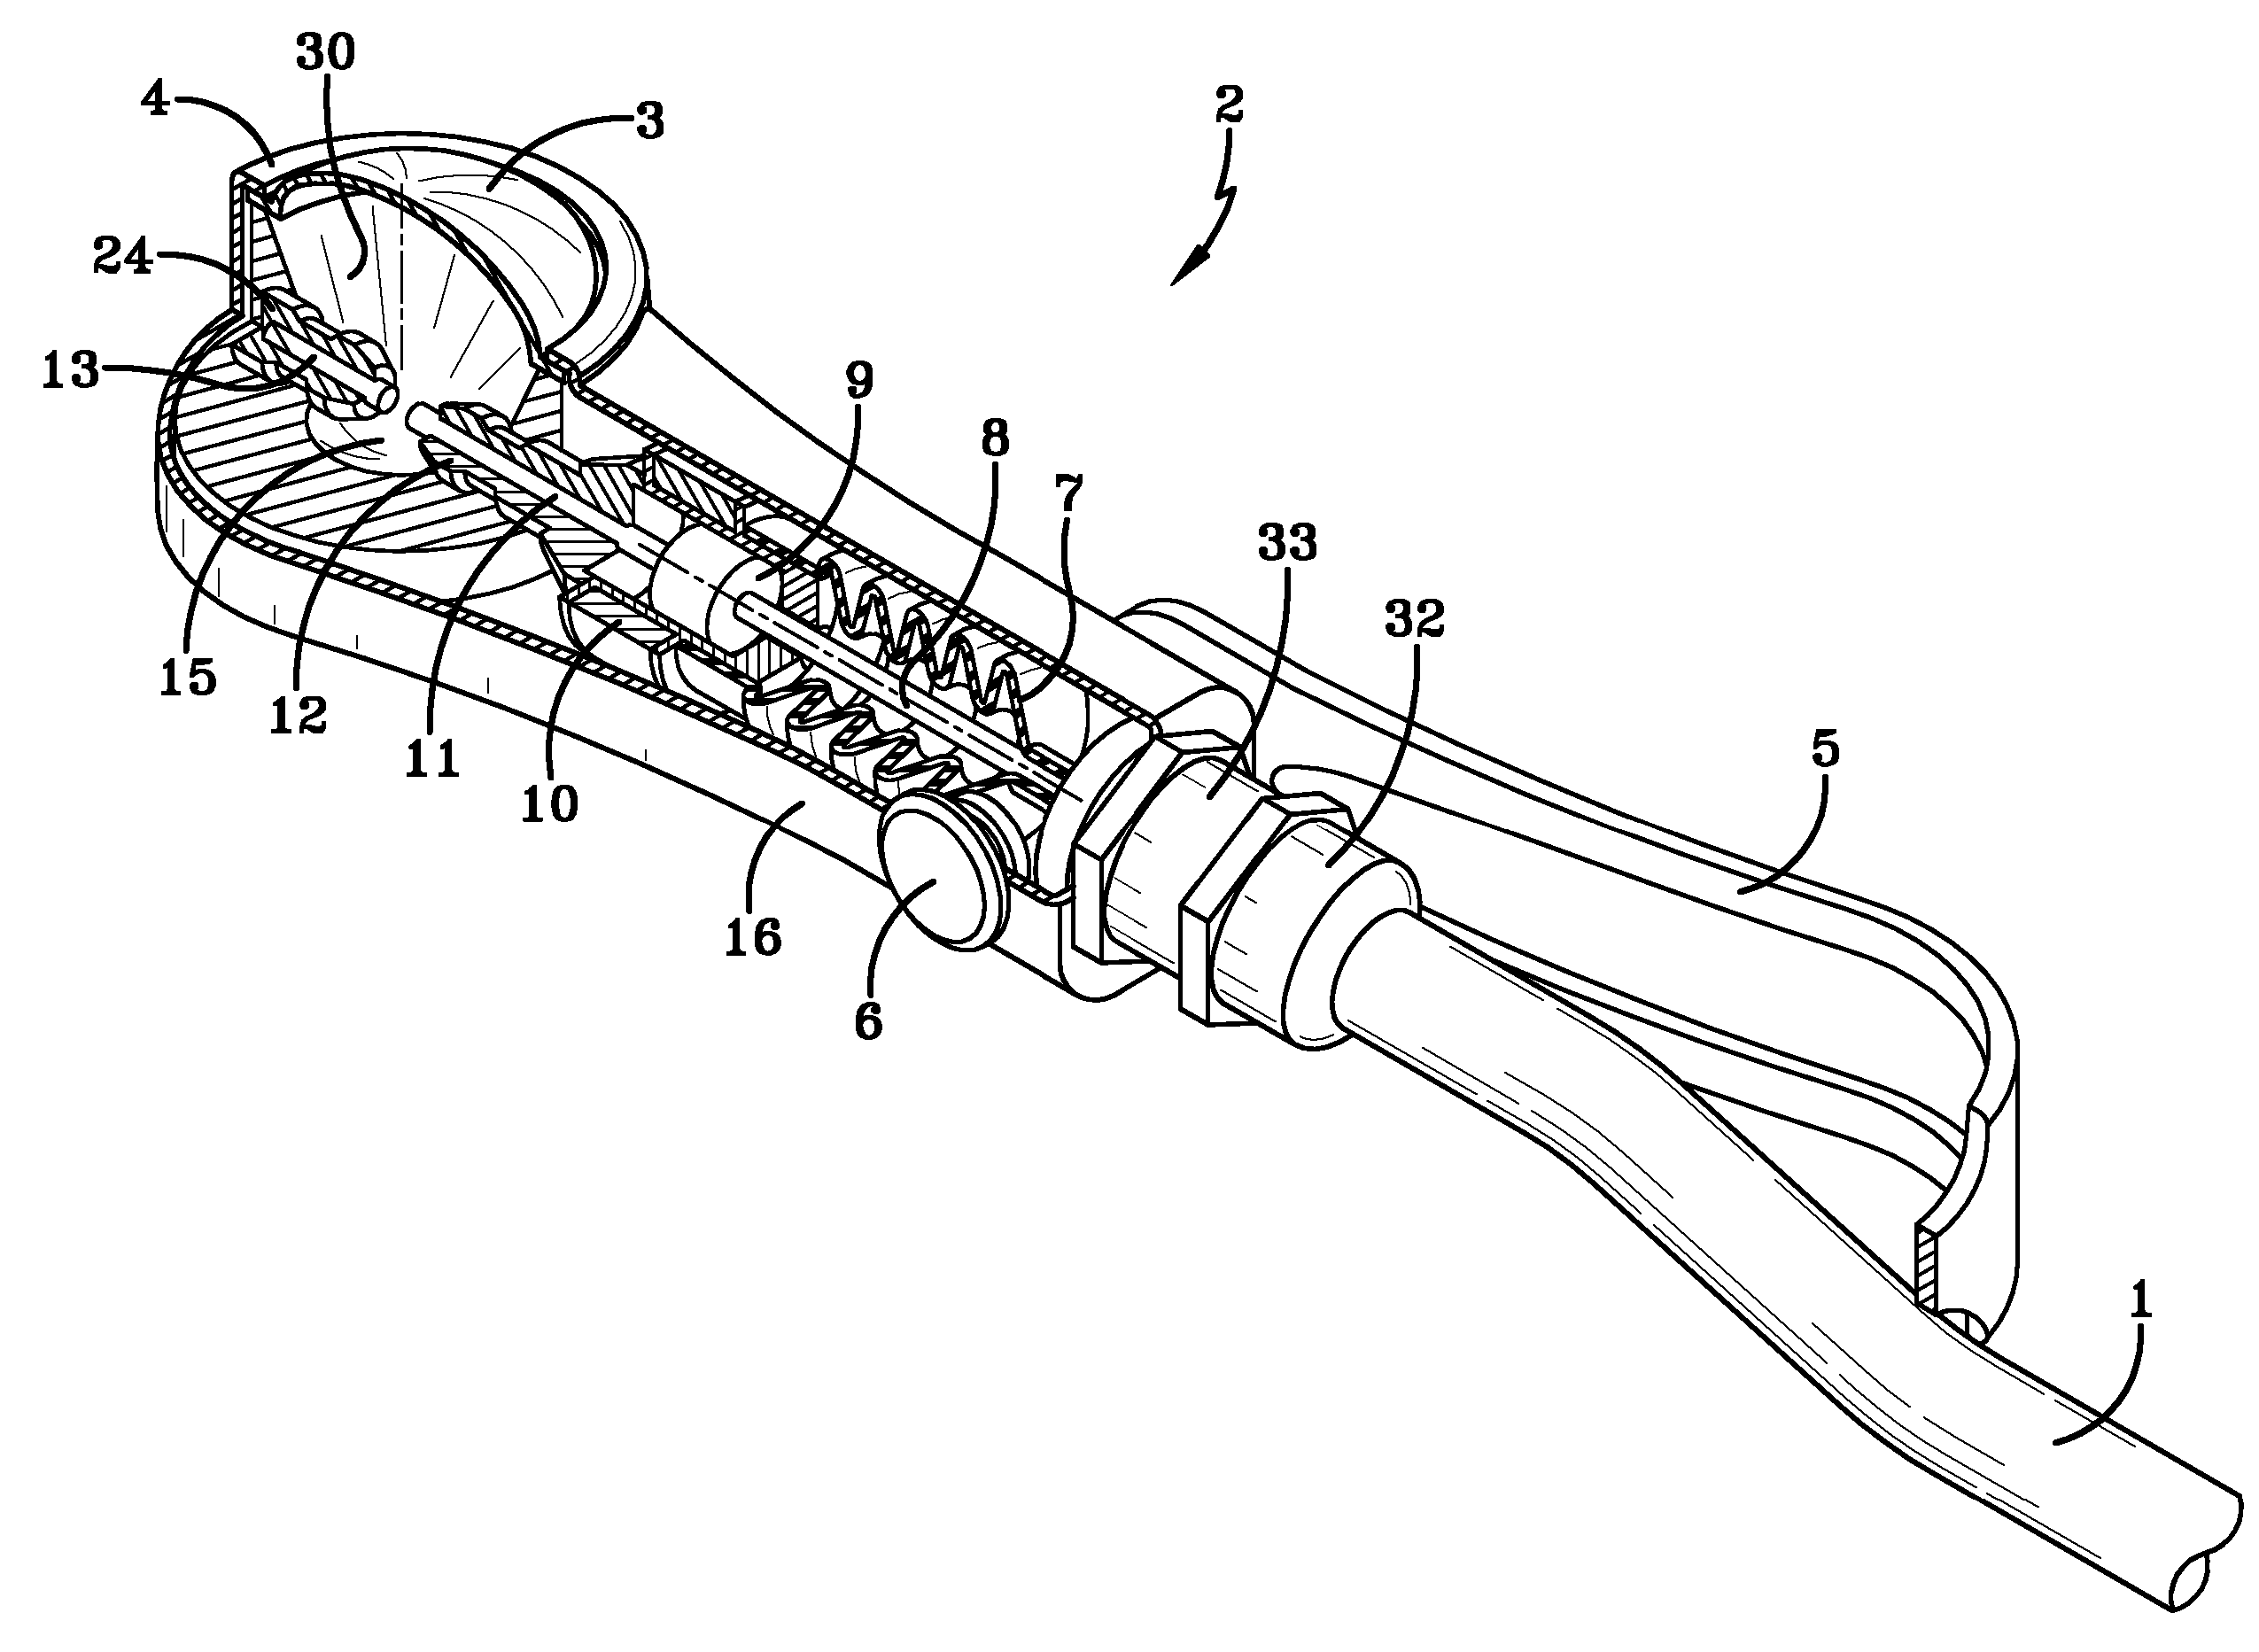 Shock wave treatment device and method of use